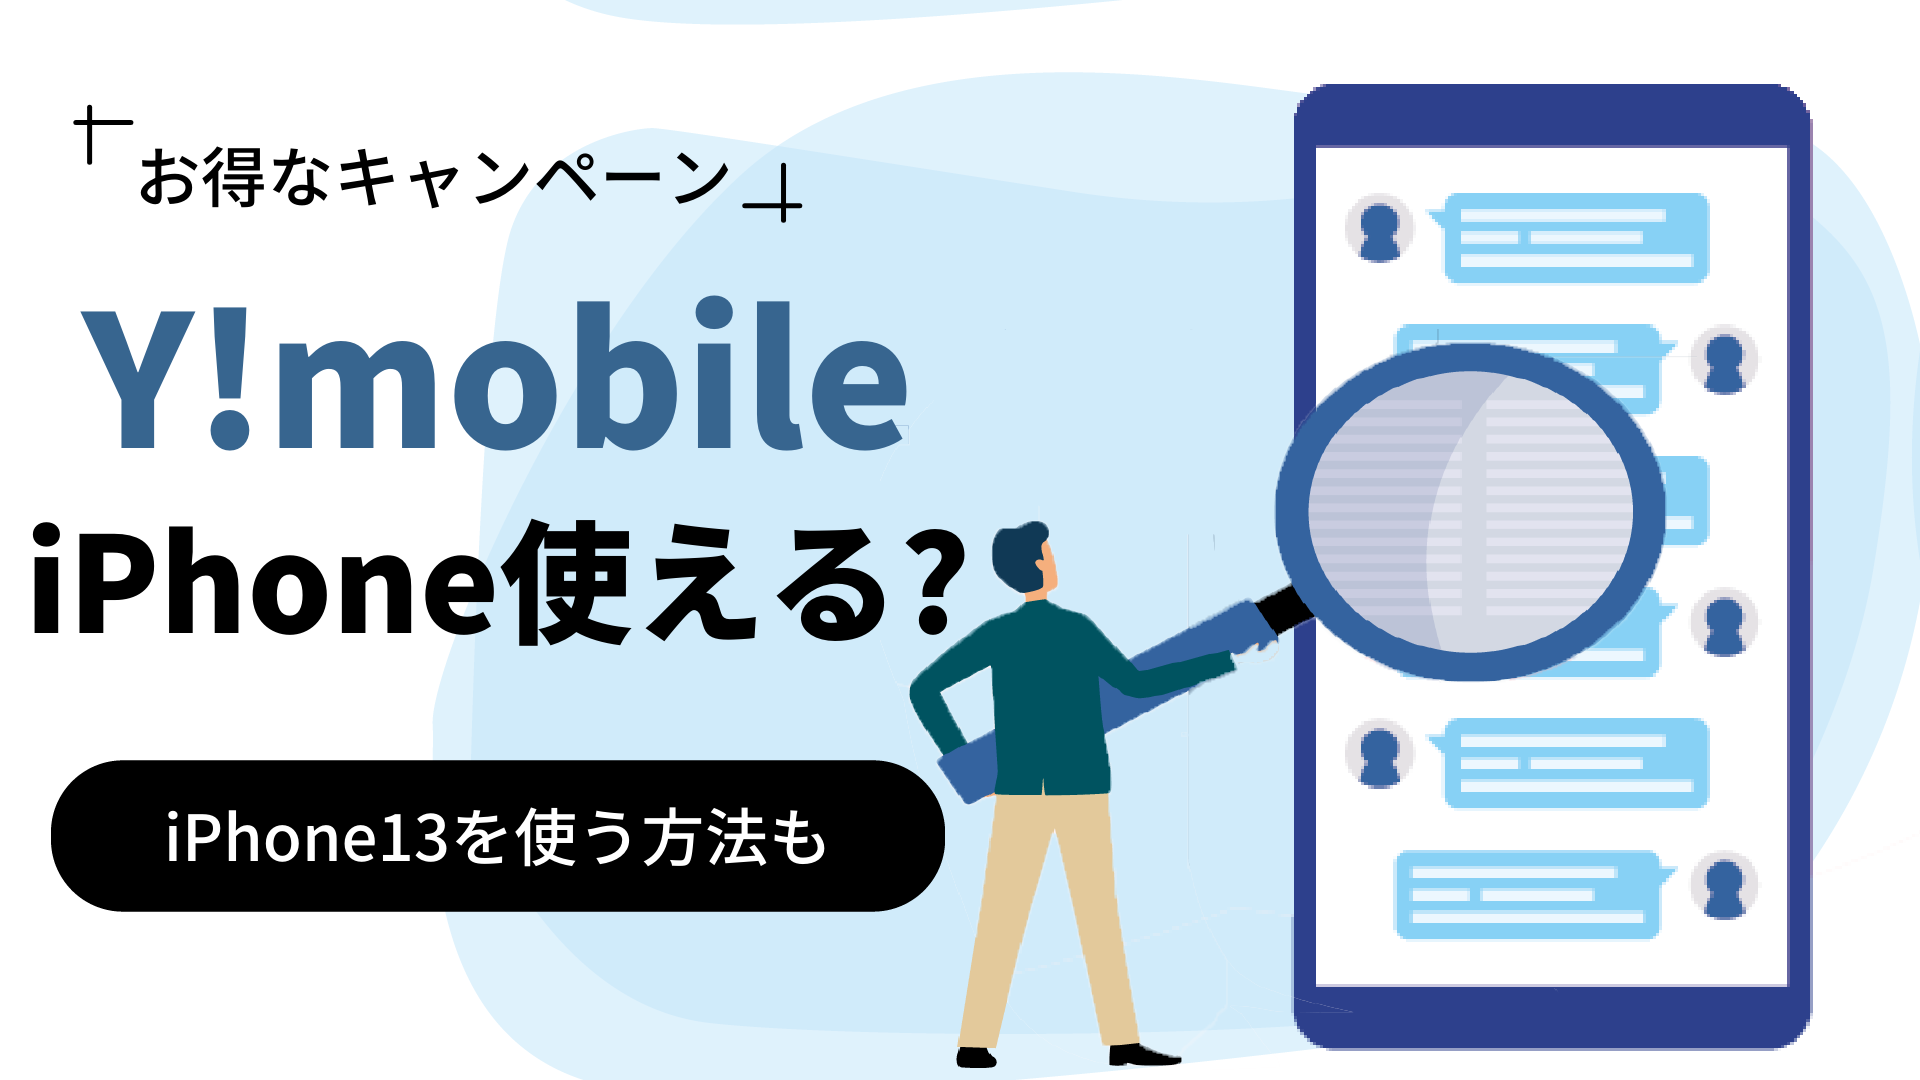 Y!mobileでiPhoneは使える！iPhoneをお得に買う方法も紹介